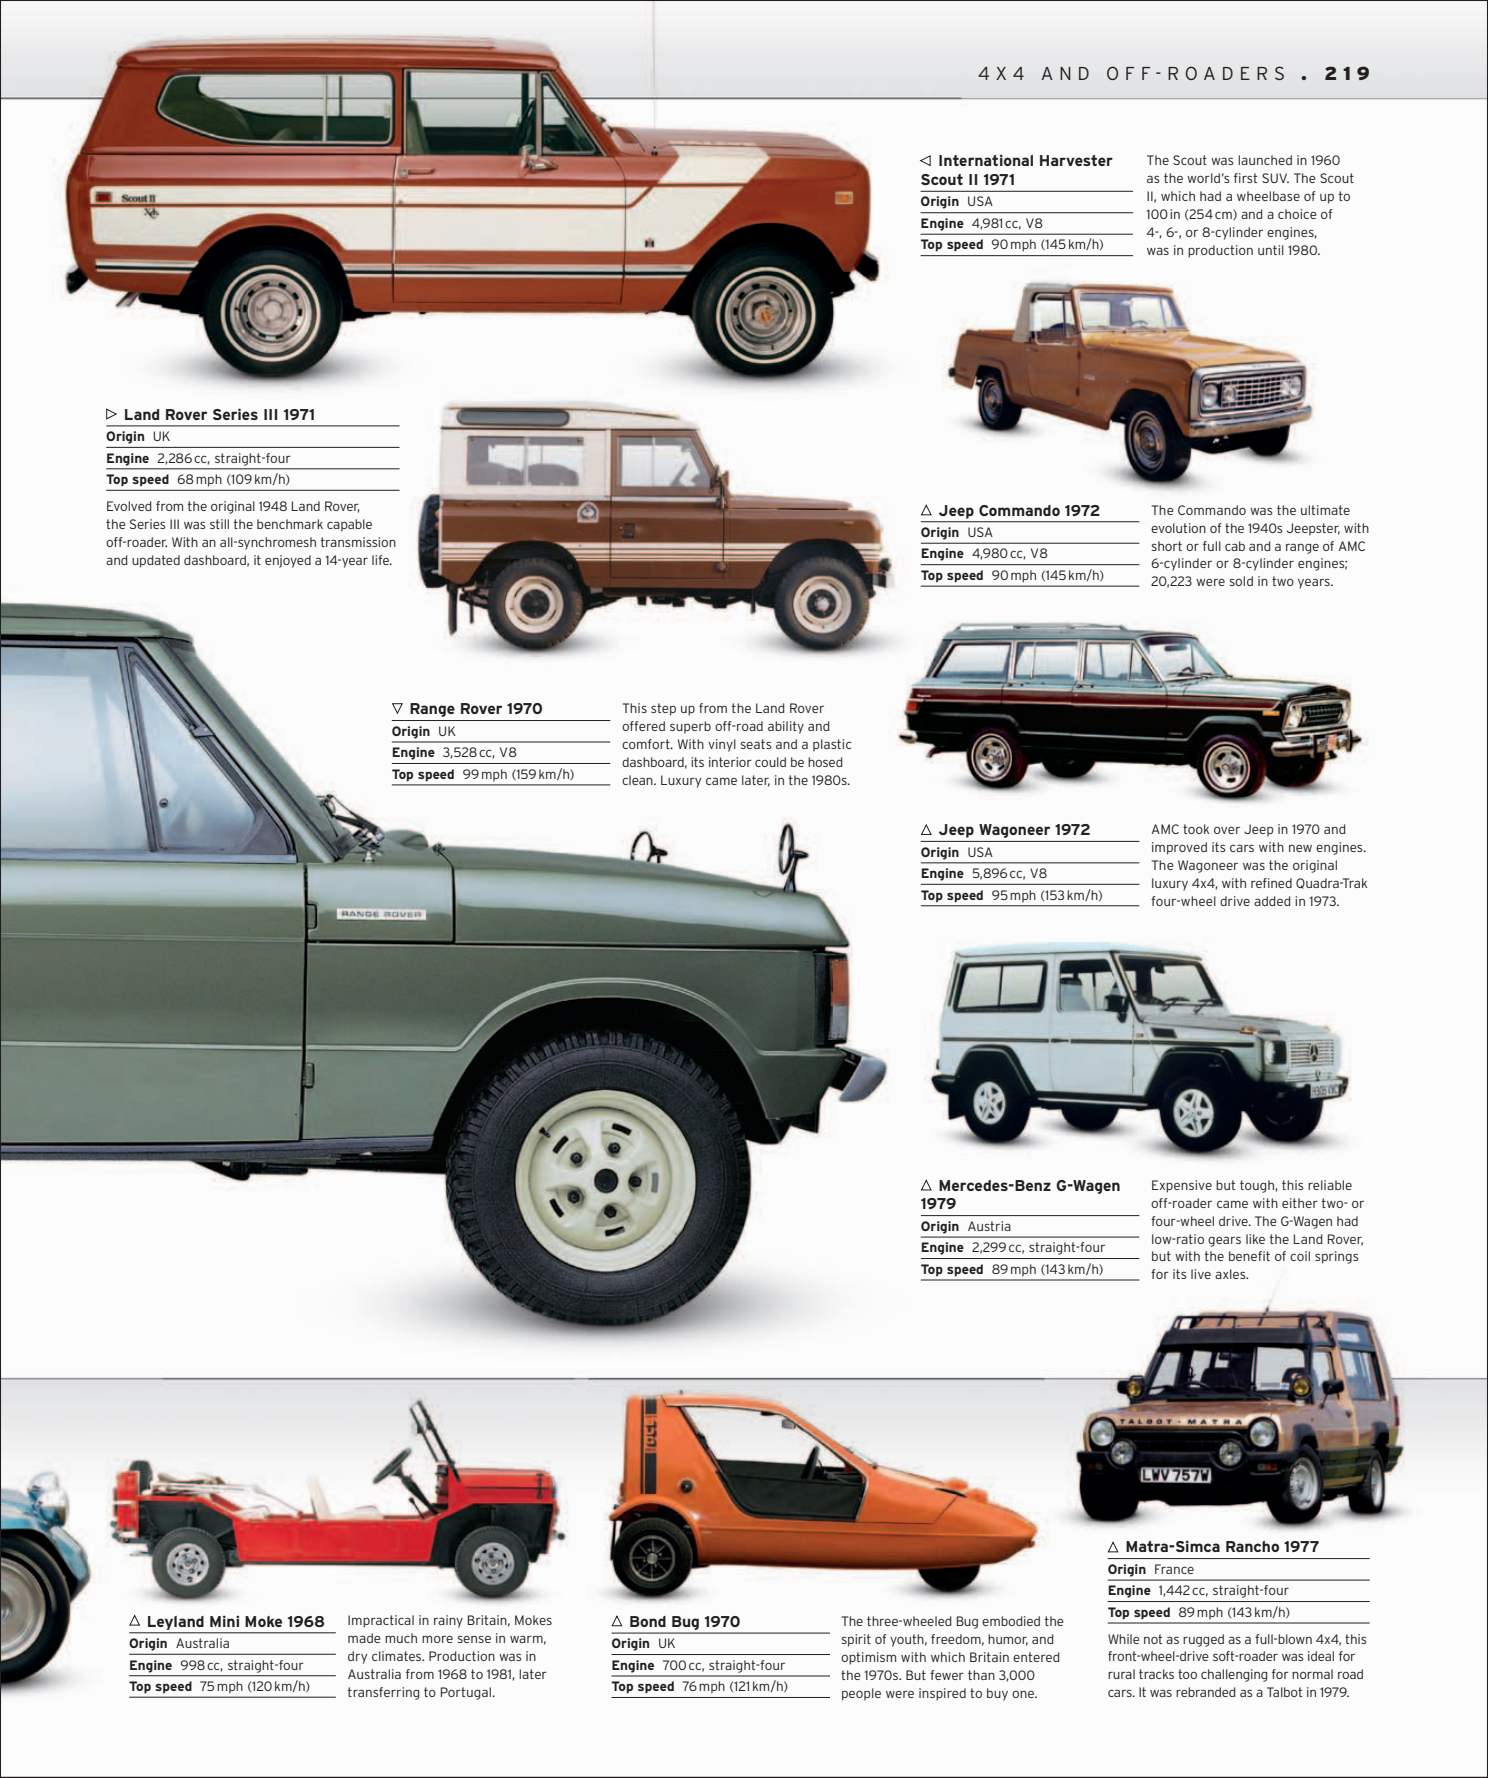 Car%20-%20The%20Definitive%20Visual%20History%20of%20the%20Automobile_221.png